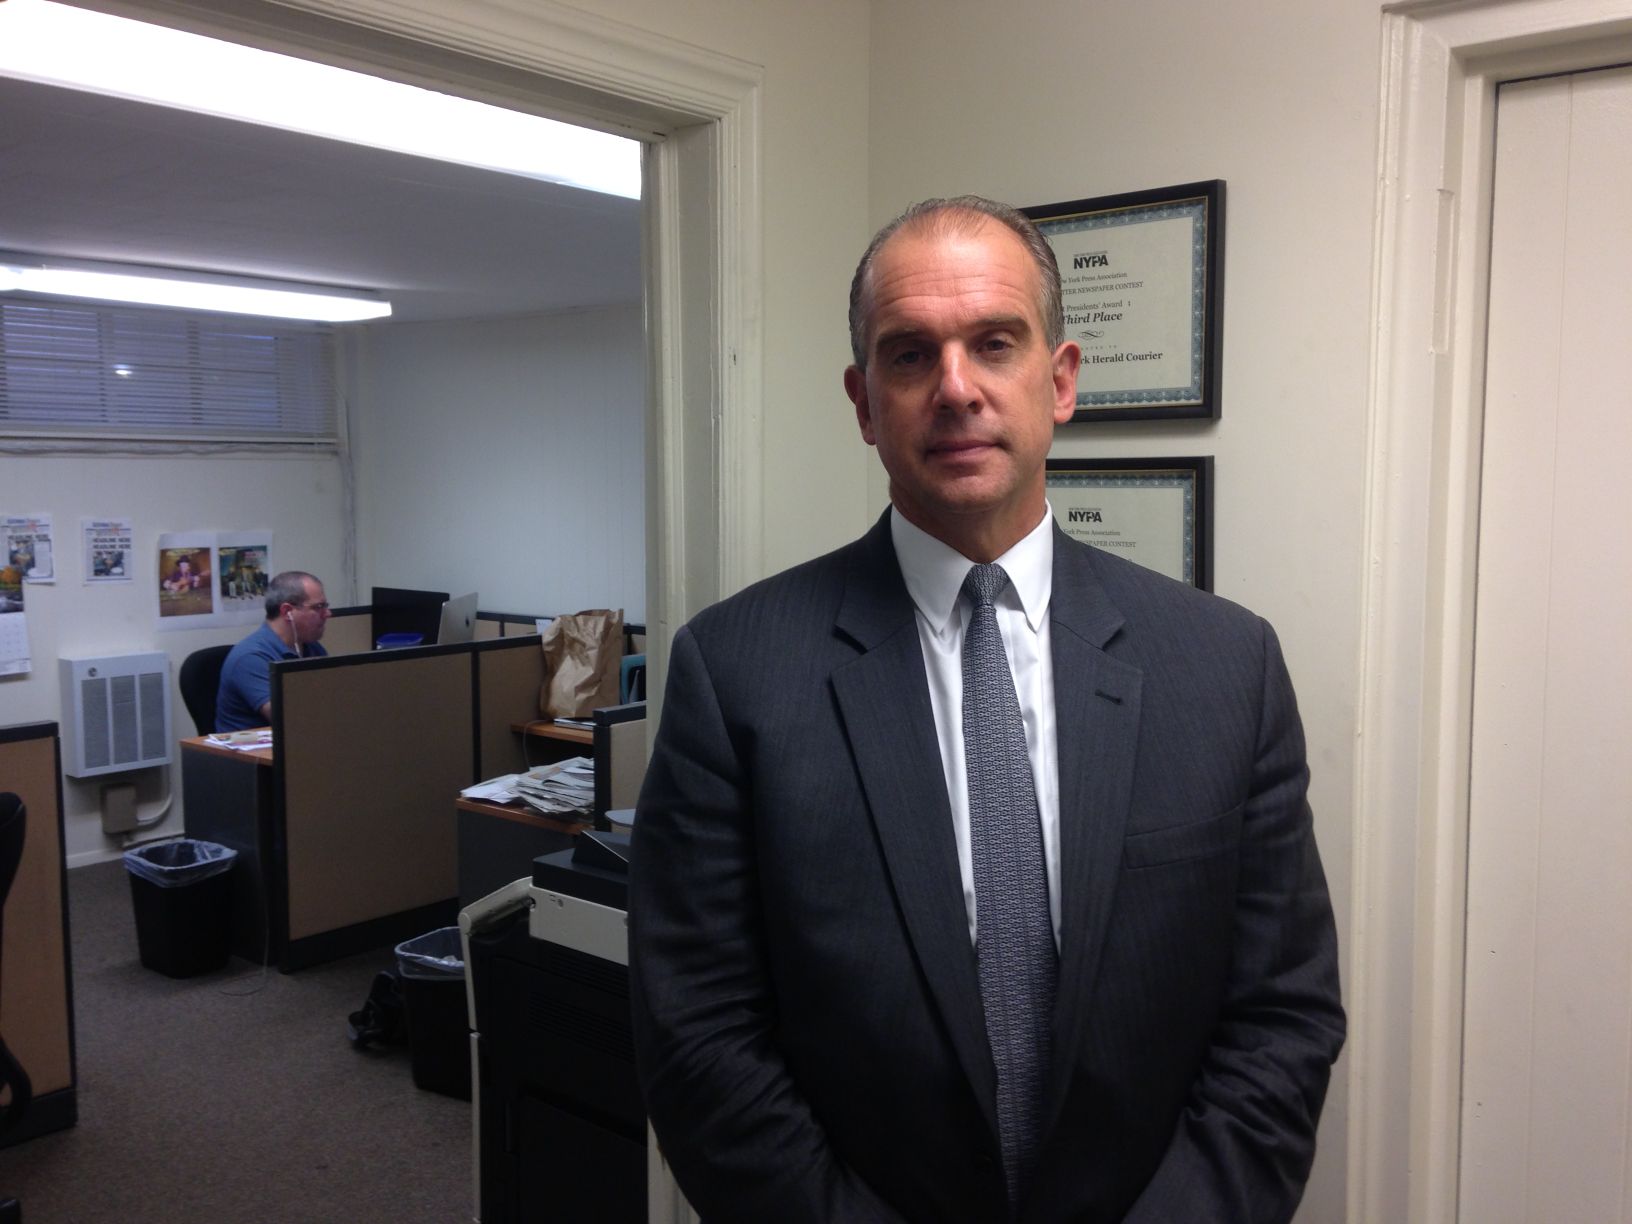 Edward Ambrosino, Hempstead councilman, indicted on federal charges